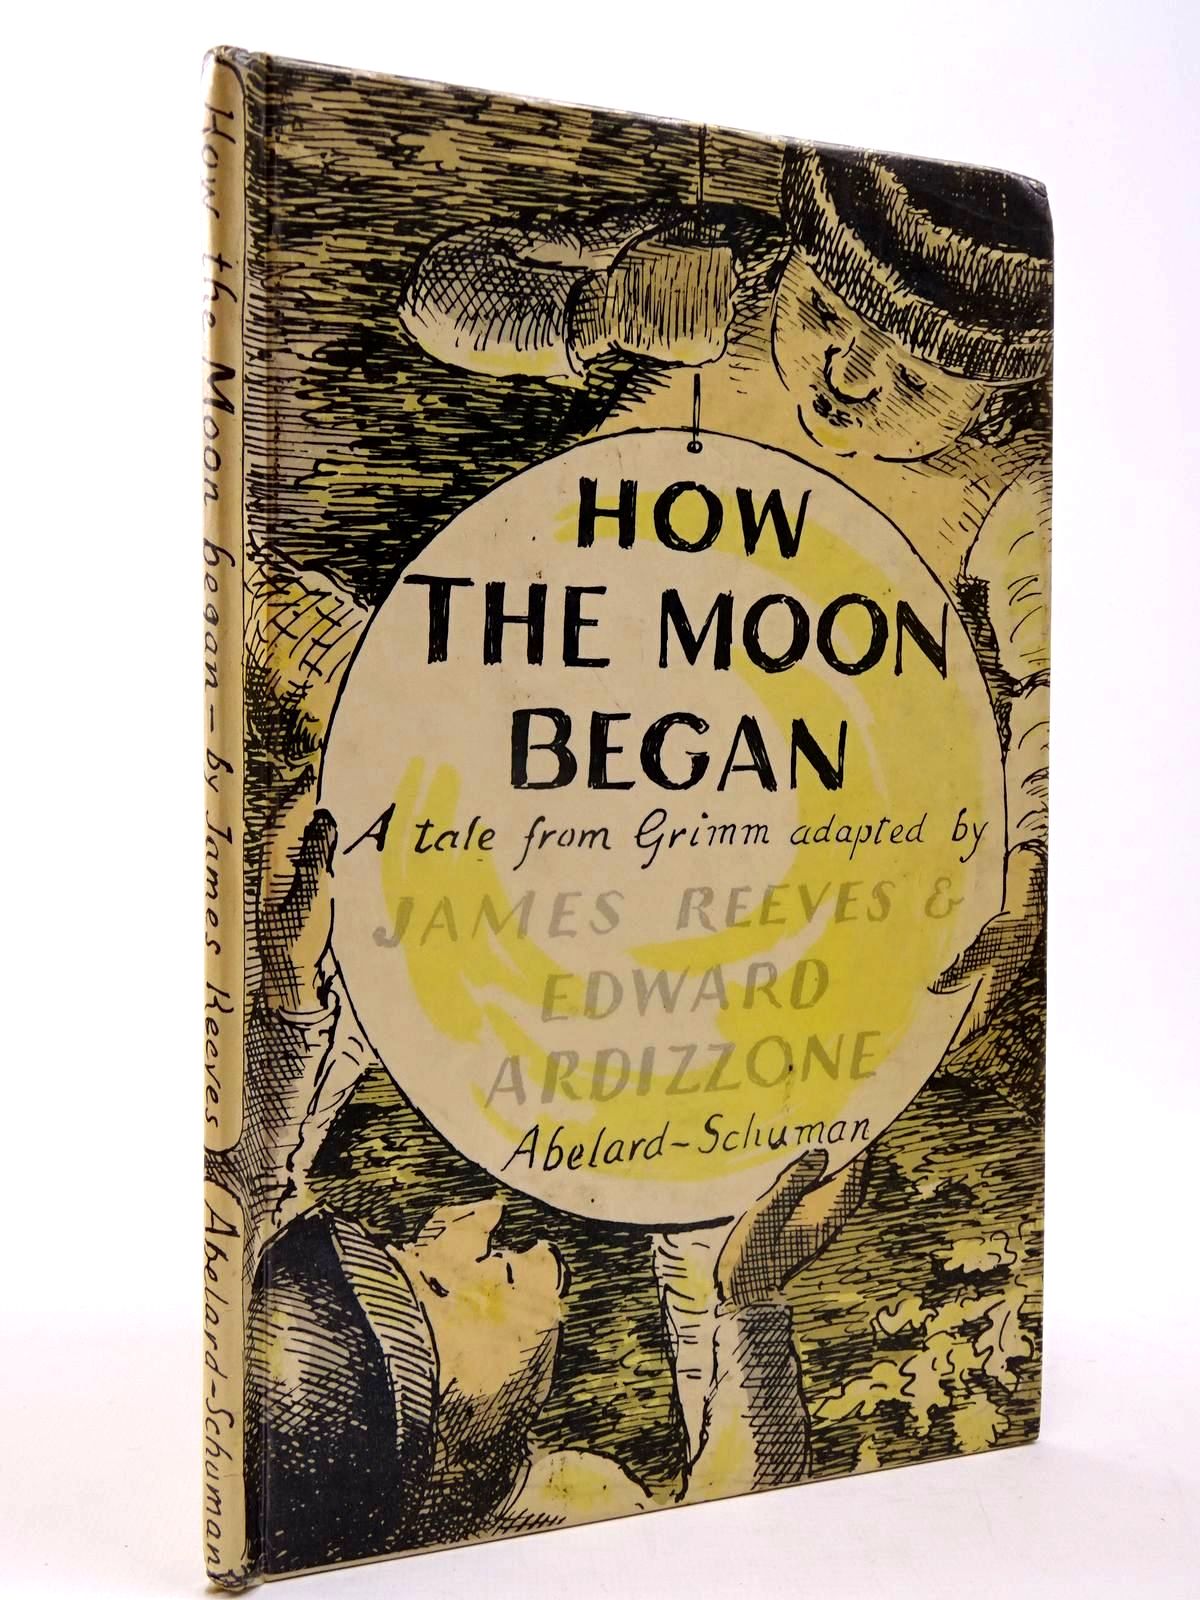 Photo of HOW THE MOON BEGAN written by Reeves, James
Grimm, Brothers illustrated by Ardizzone, Edward published by Abelard-Schuman (STOCK CODE: 2130150)  for sale by Stella & Rose's Books